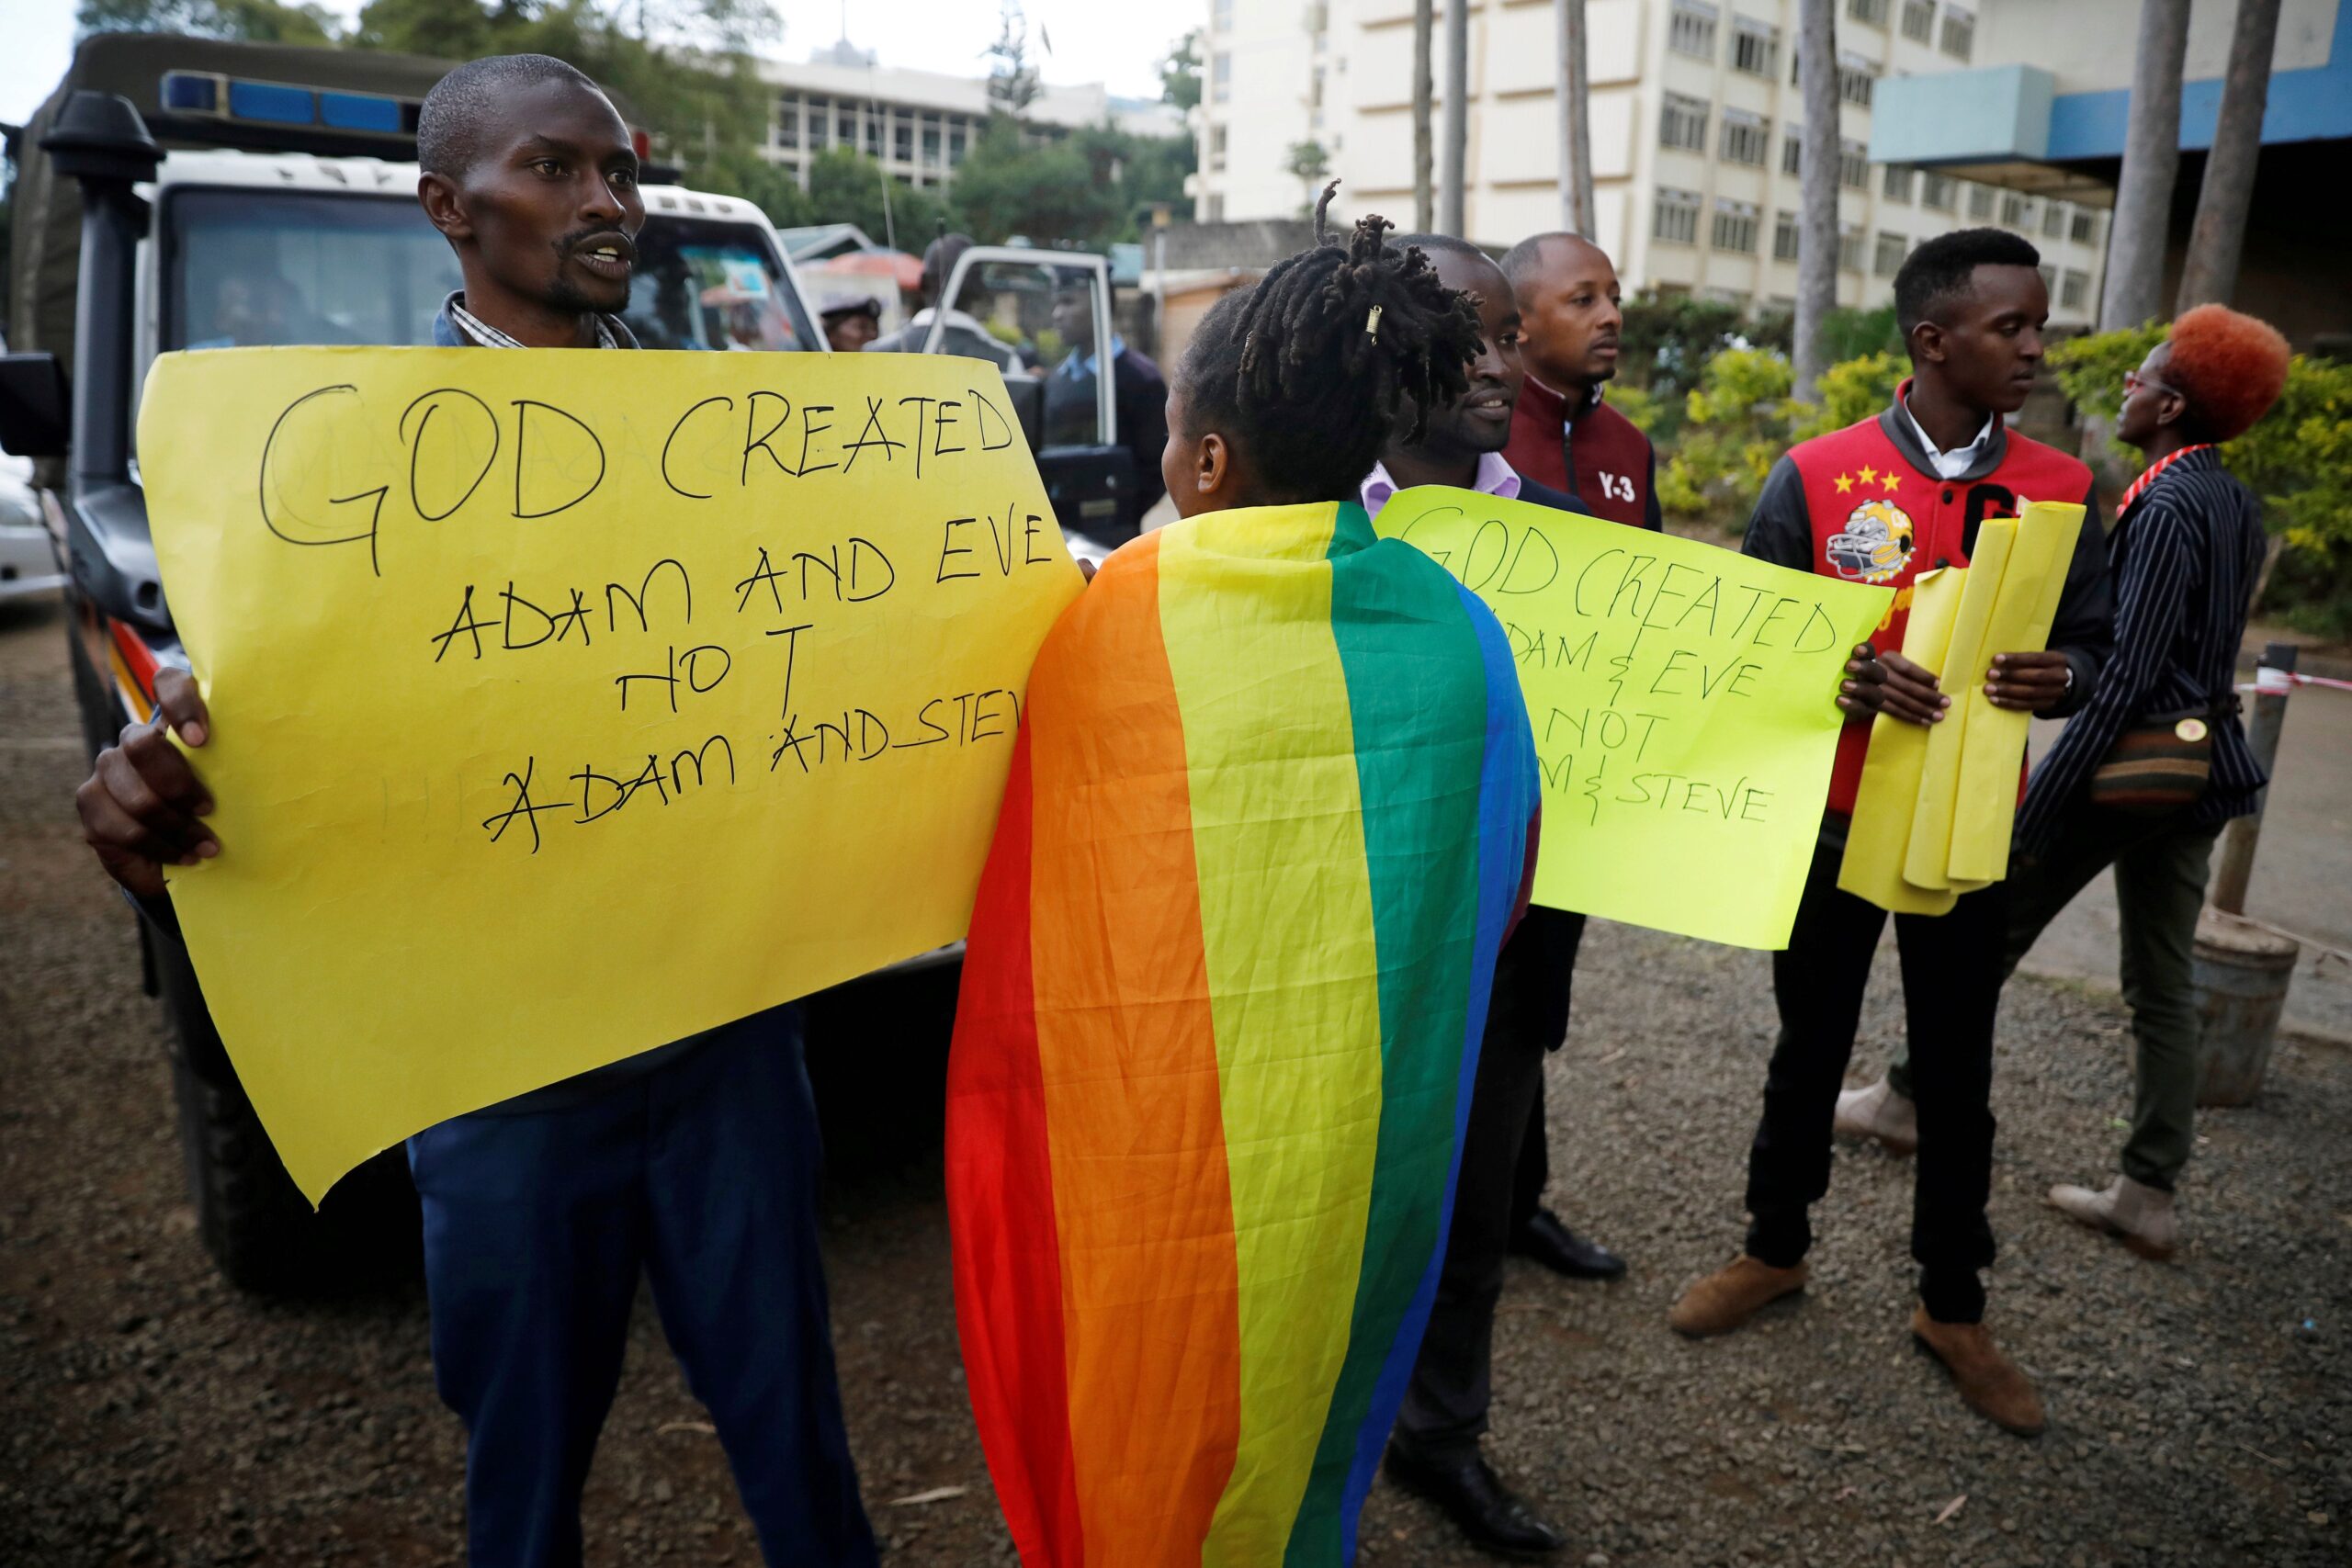 An LGBTQ+ activist walks past anti-gay rights protesters holding placards, after a ruling by Kenya's High Court to uphold a law banning gay sex, in Nairobi, Kenya, on May 24, 2019. Baz Ratner/Reuters